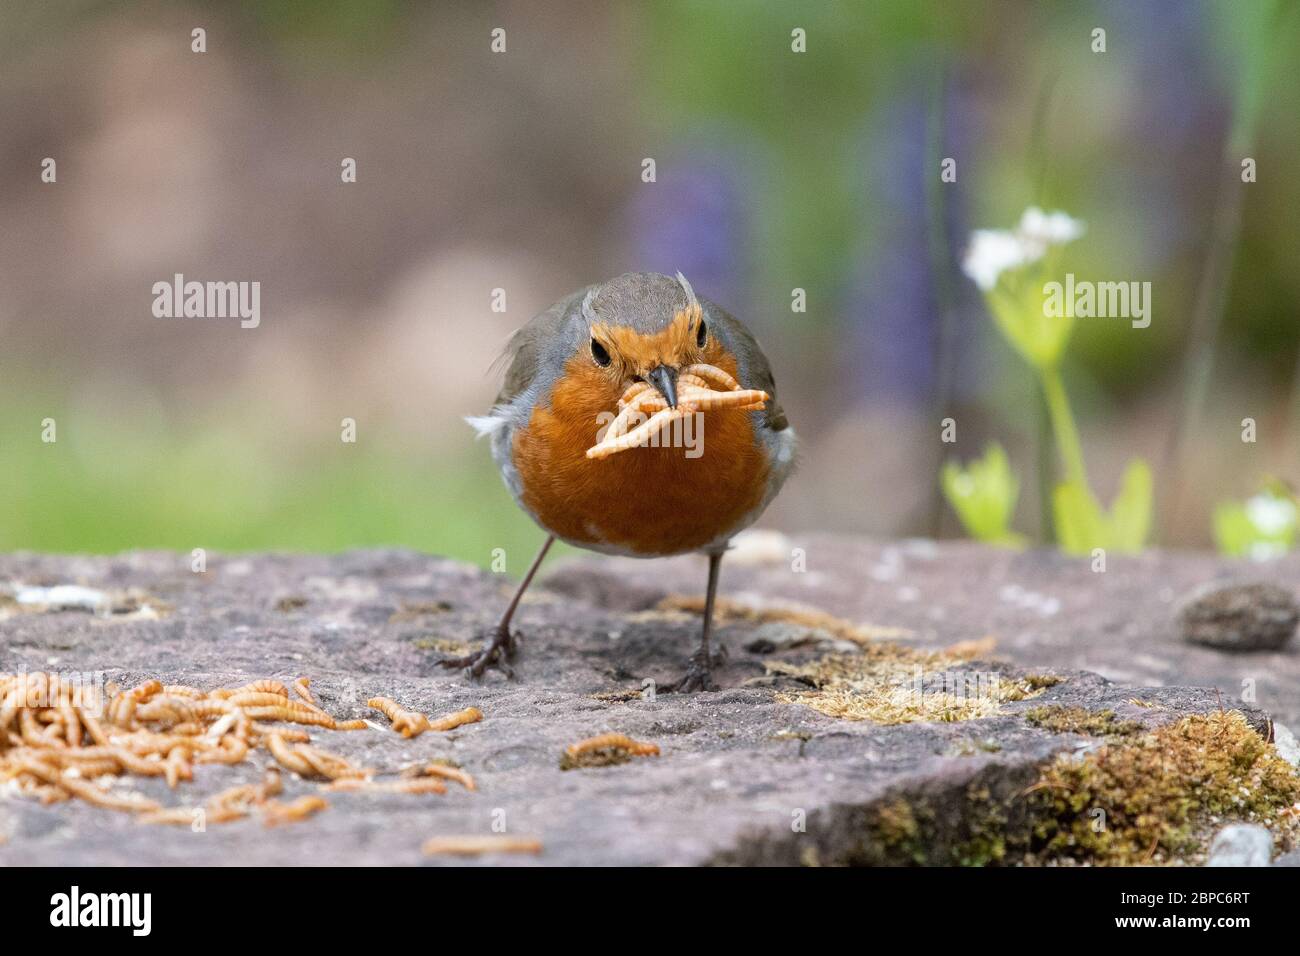 European Robin - erithacus rubecula - collecting mealworms to take to young in its nest - Scotland, UK Stock Photo